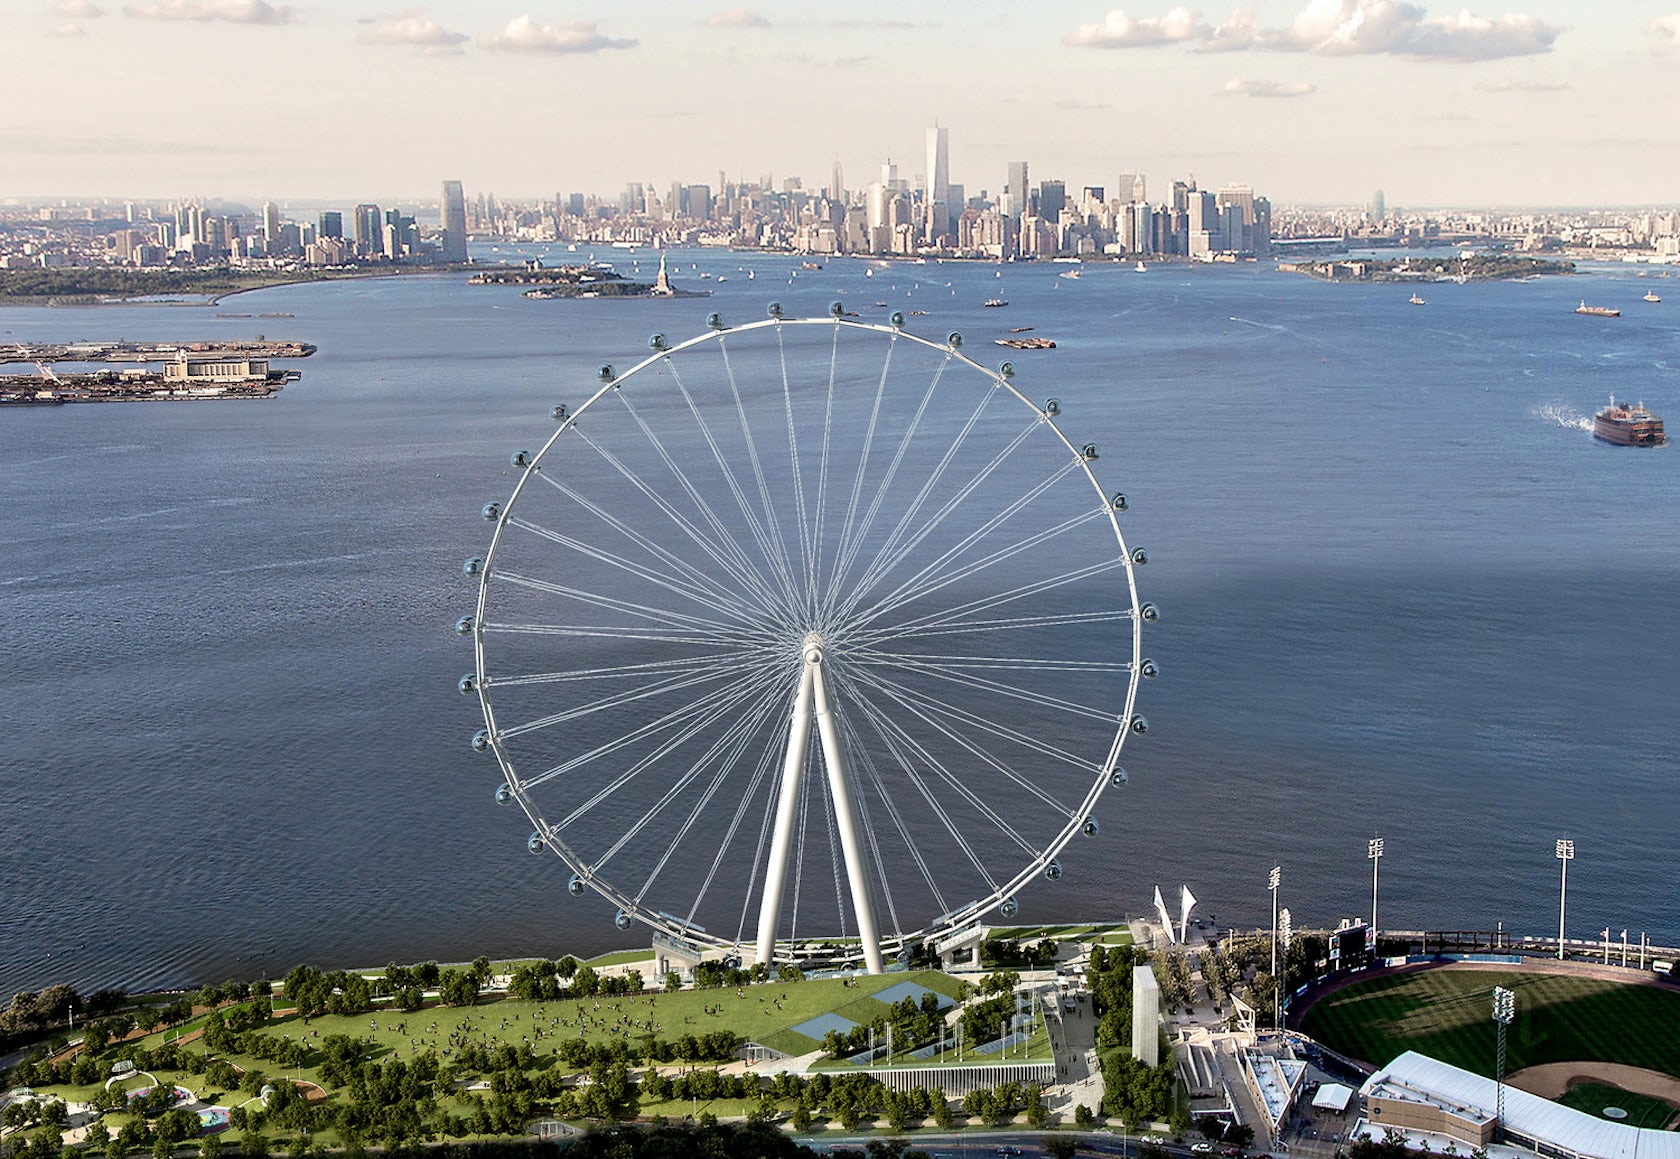 Who Made That Ferris Wheel? - The New York Times